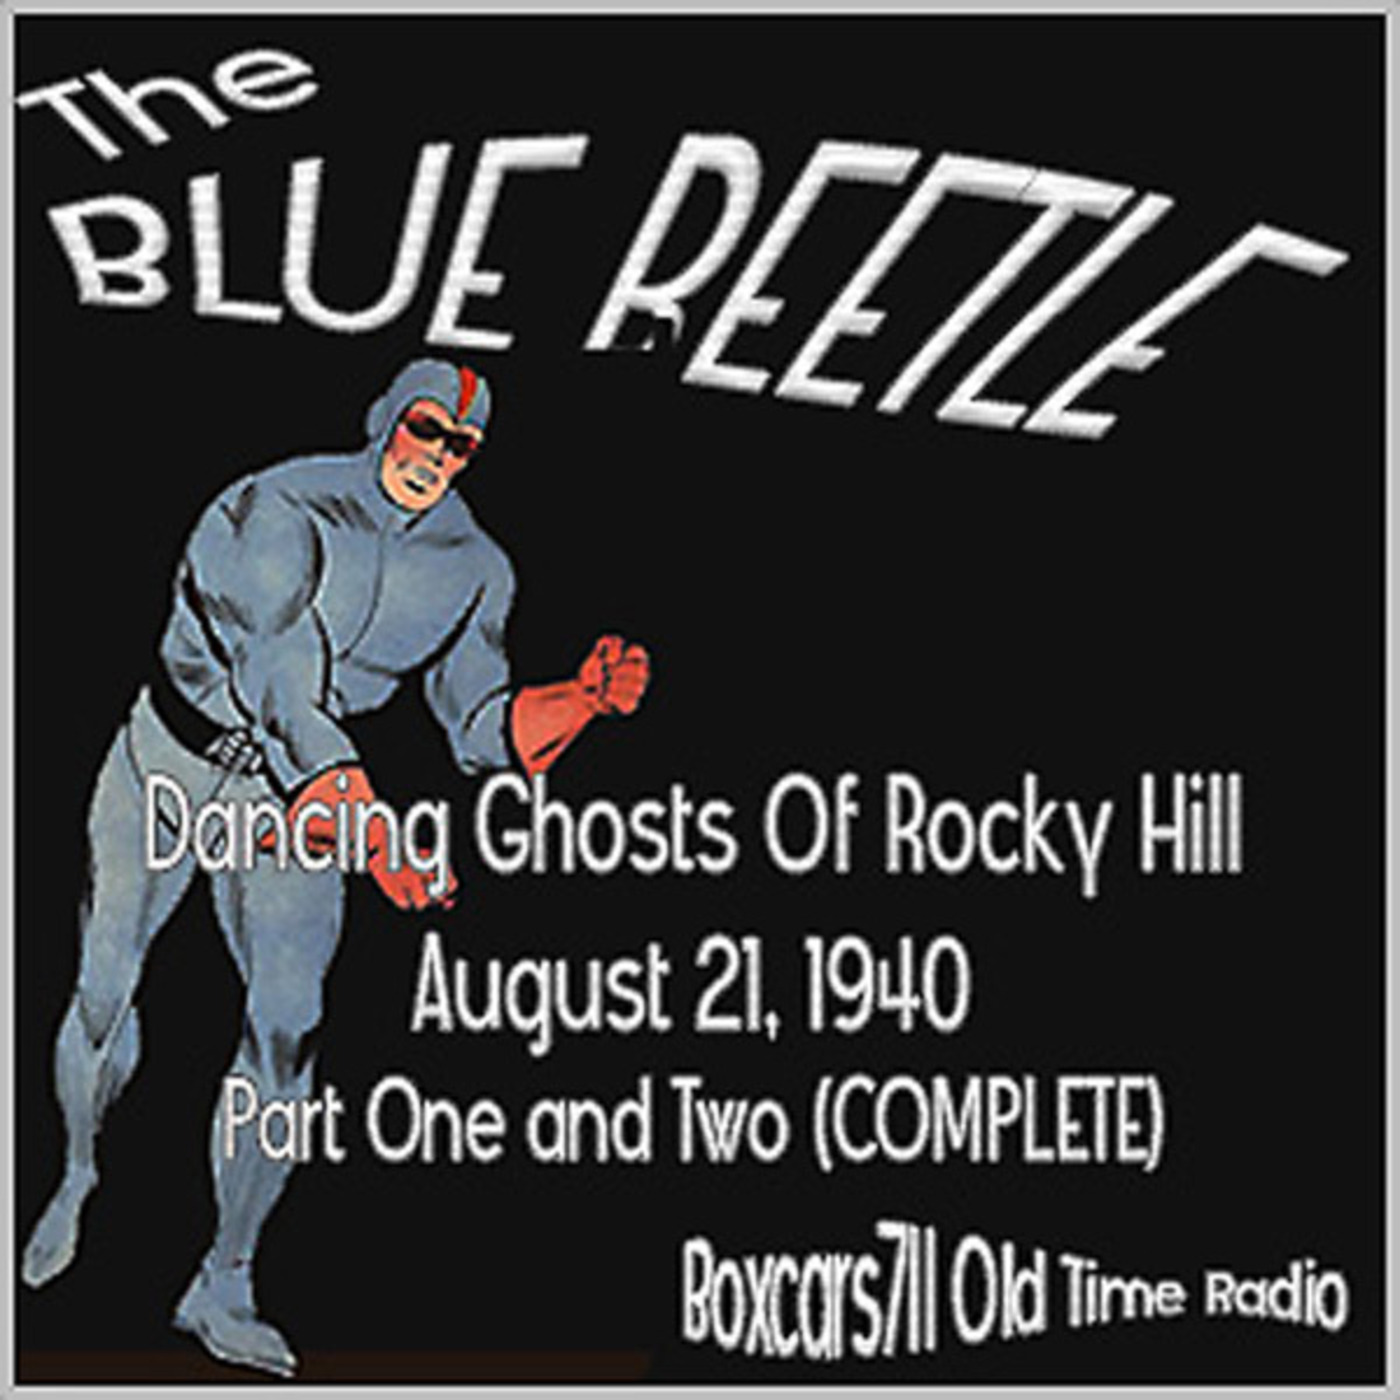 Episode 9594: The Blue Beetle - :Dancing Ghosts Of Rocky Hill 2 Pts. COMPLETE (08-21-41)